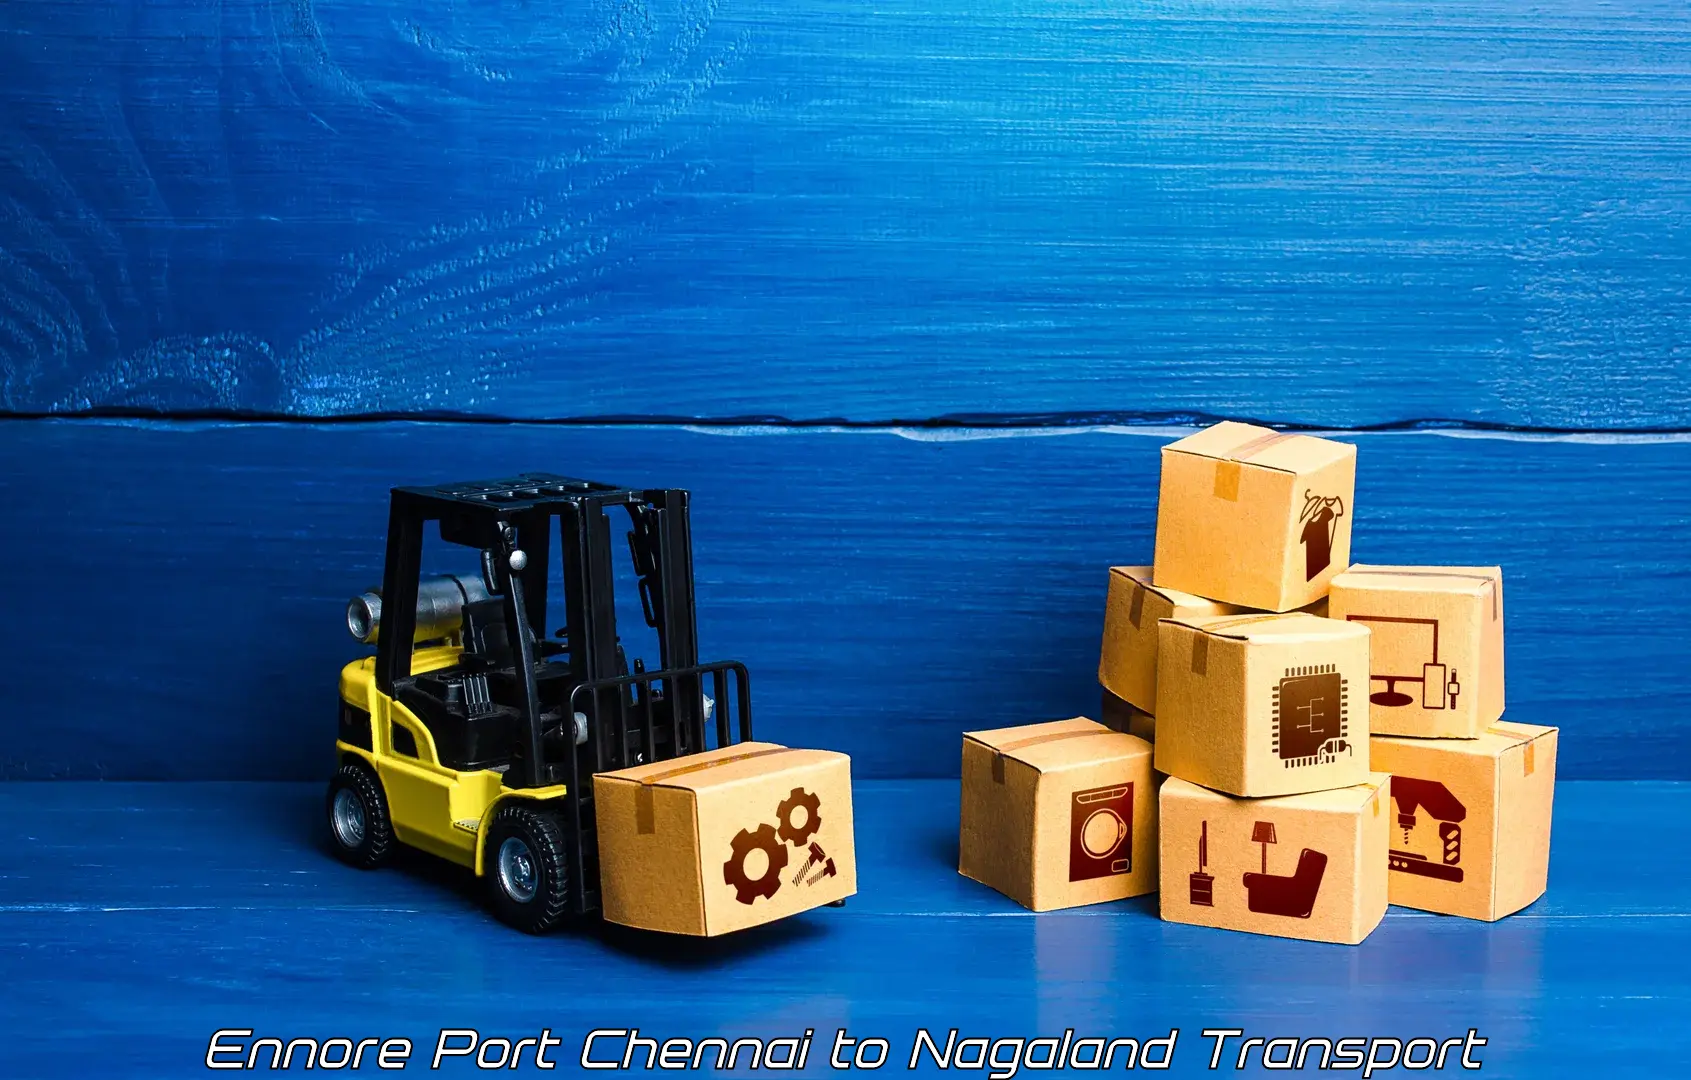 Transport in sharing Ennore Port Chennai to Mon